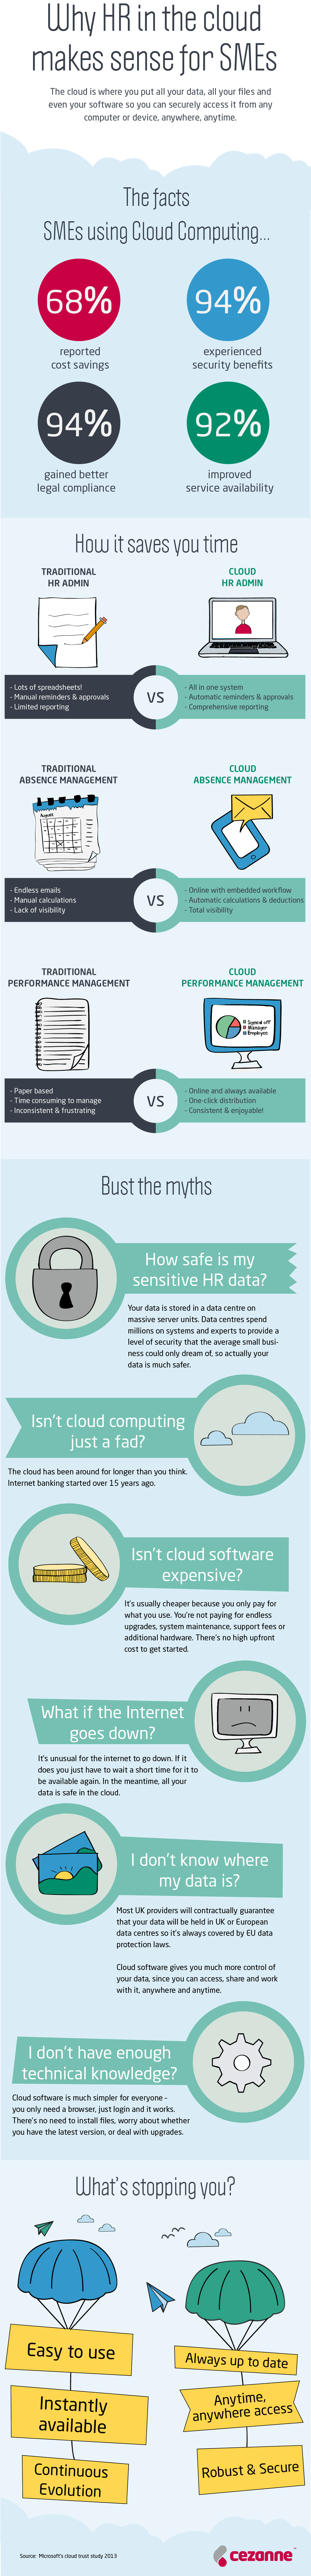 Why HR in the cloud makes sense for SMEs